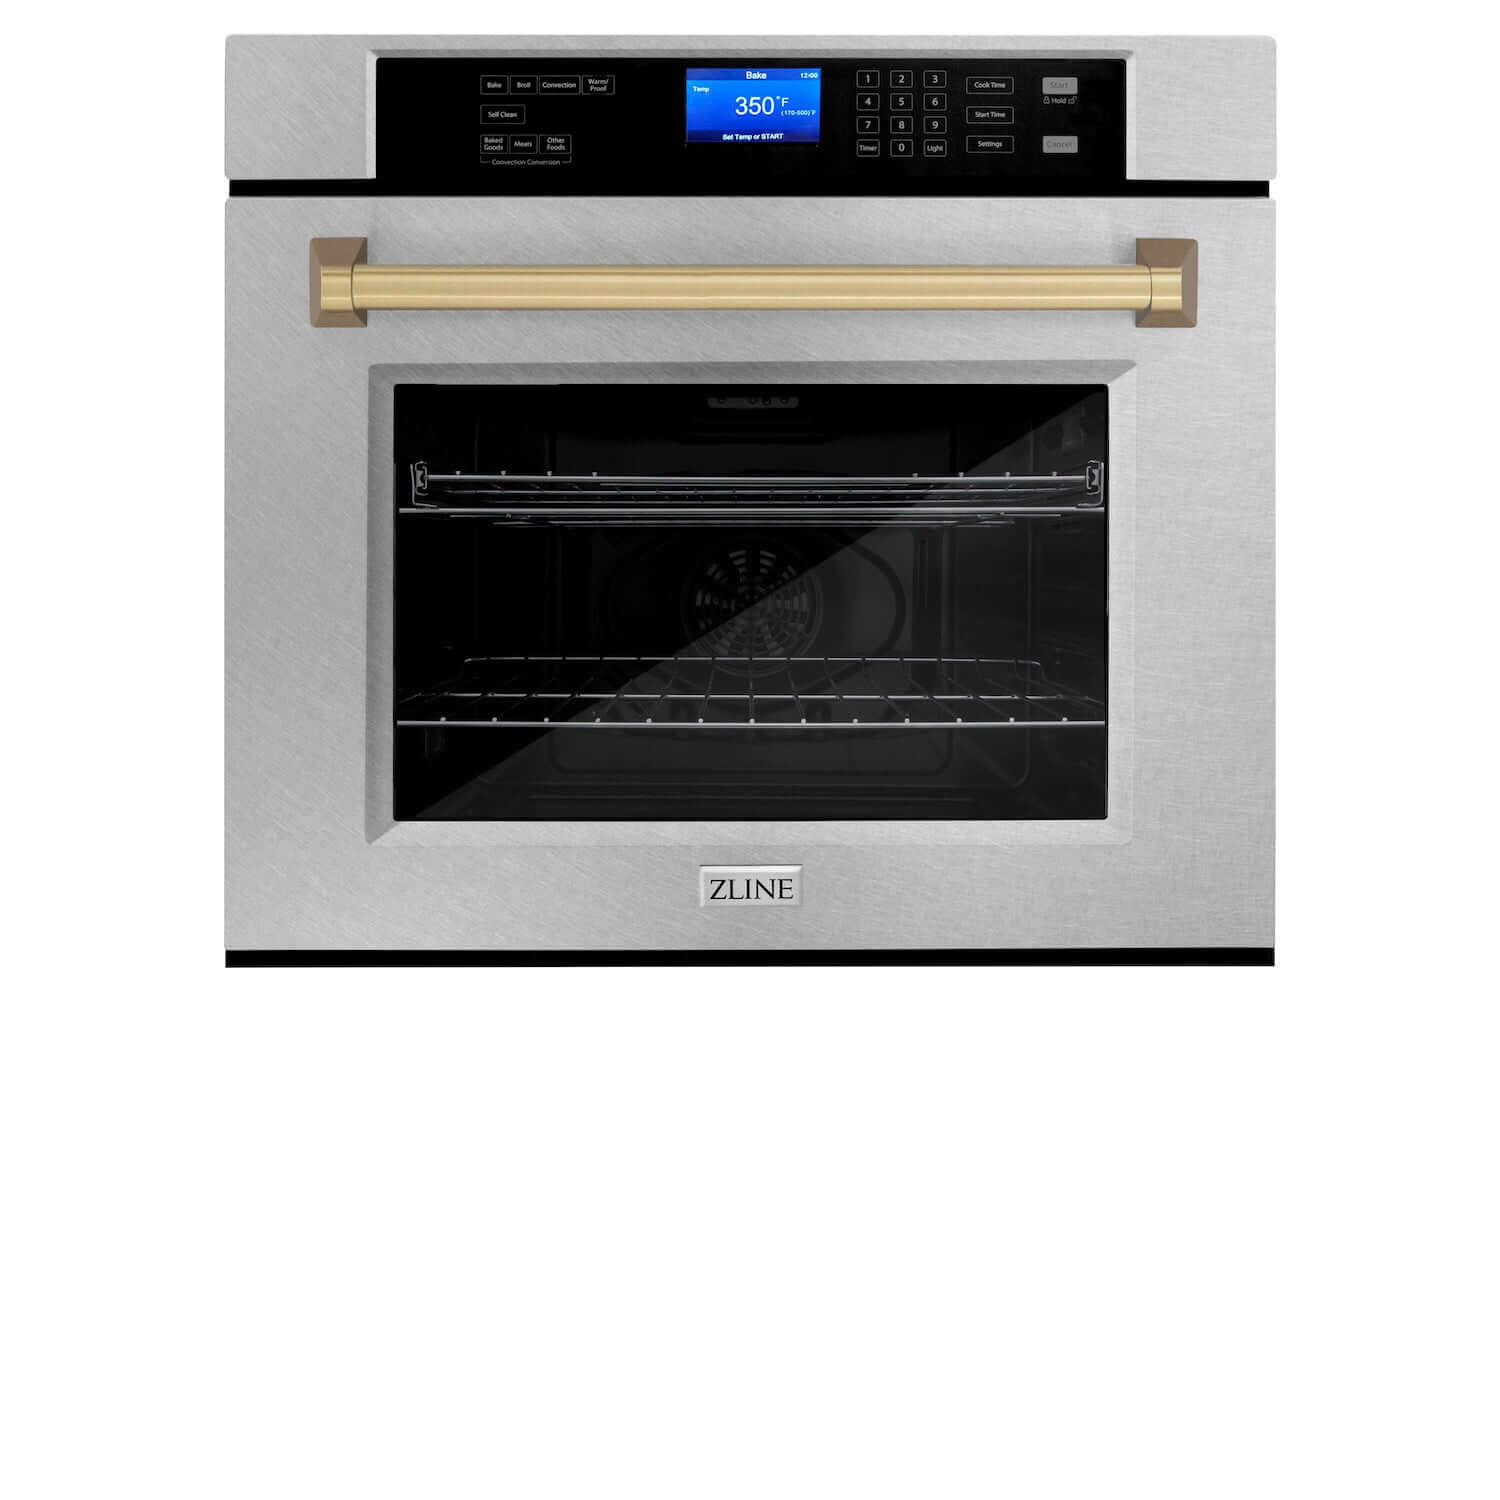 ZLINE Autograph Edition 30 in. Electric Single Wall Oven with Self Clean and True Convection in Fingerprint Resistant Stainless Steel and Champagne Bronze Accents (AWSSZ-30-CB)-Wall Ovens-AWSSZ-30-CB ZLINE Kitchen and Bath